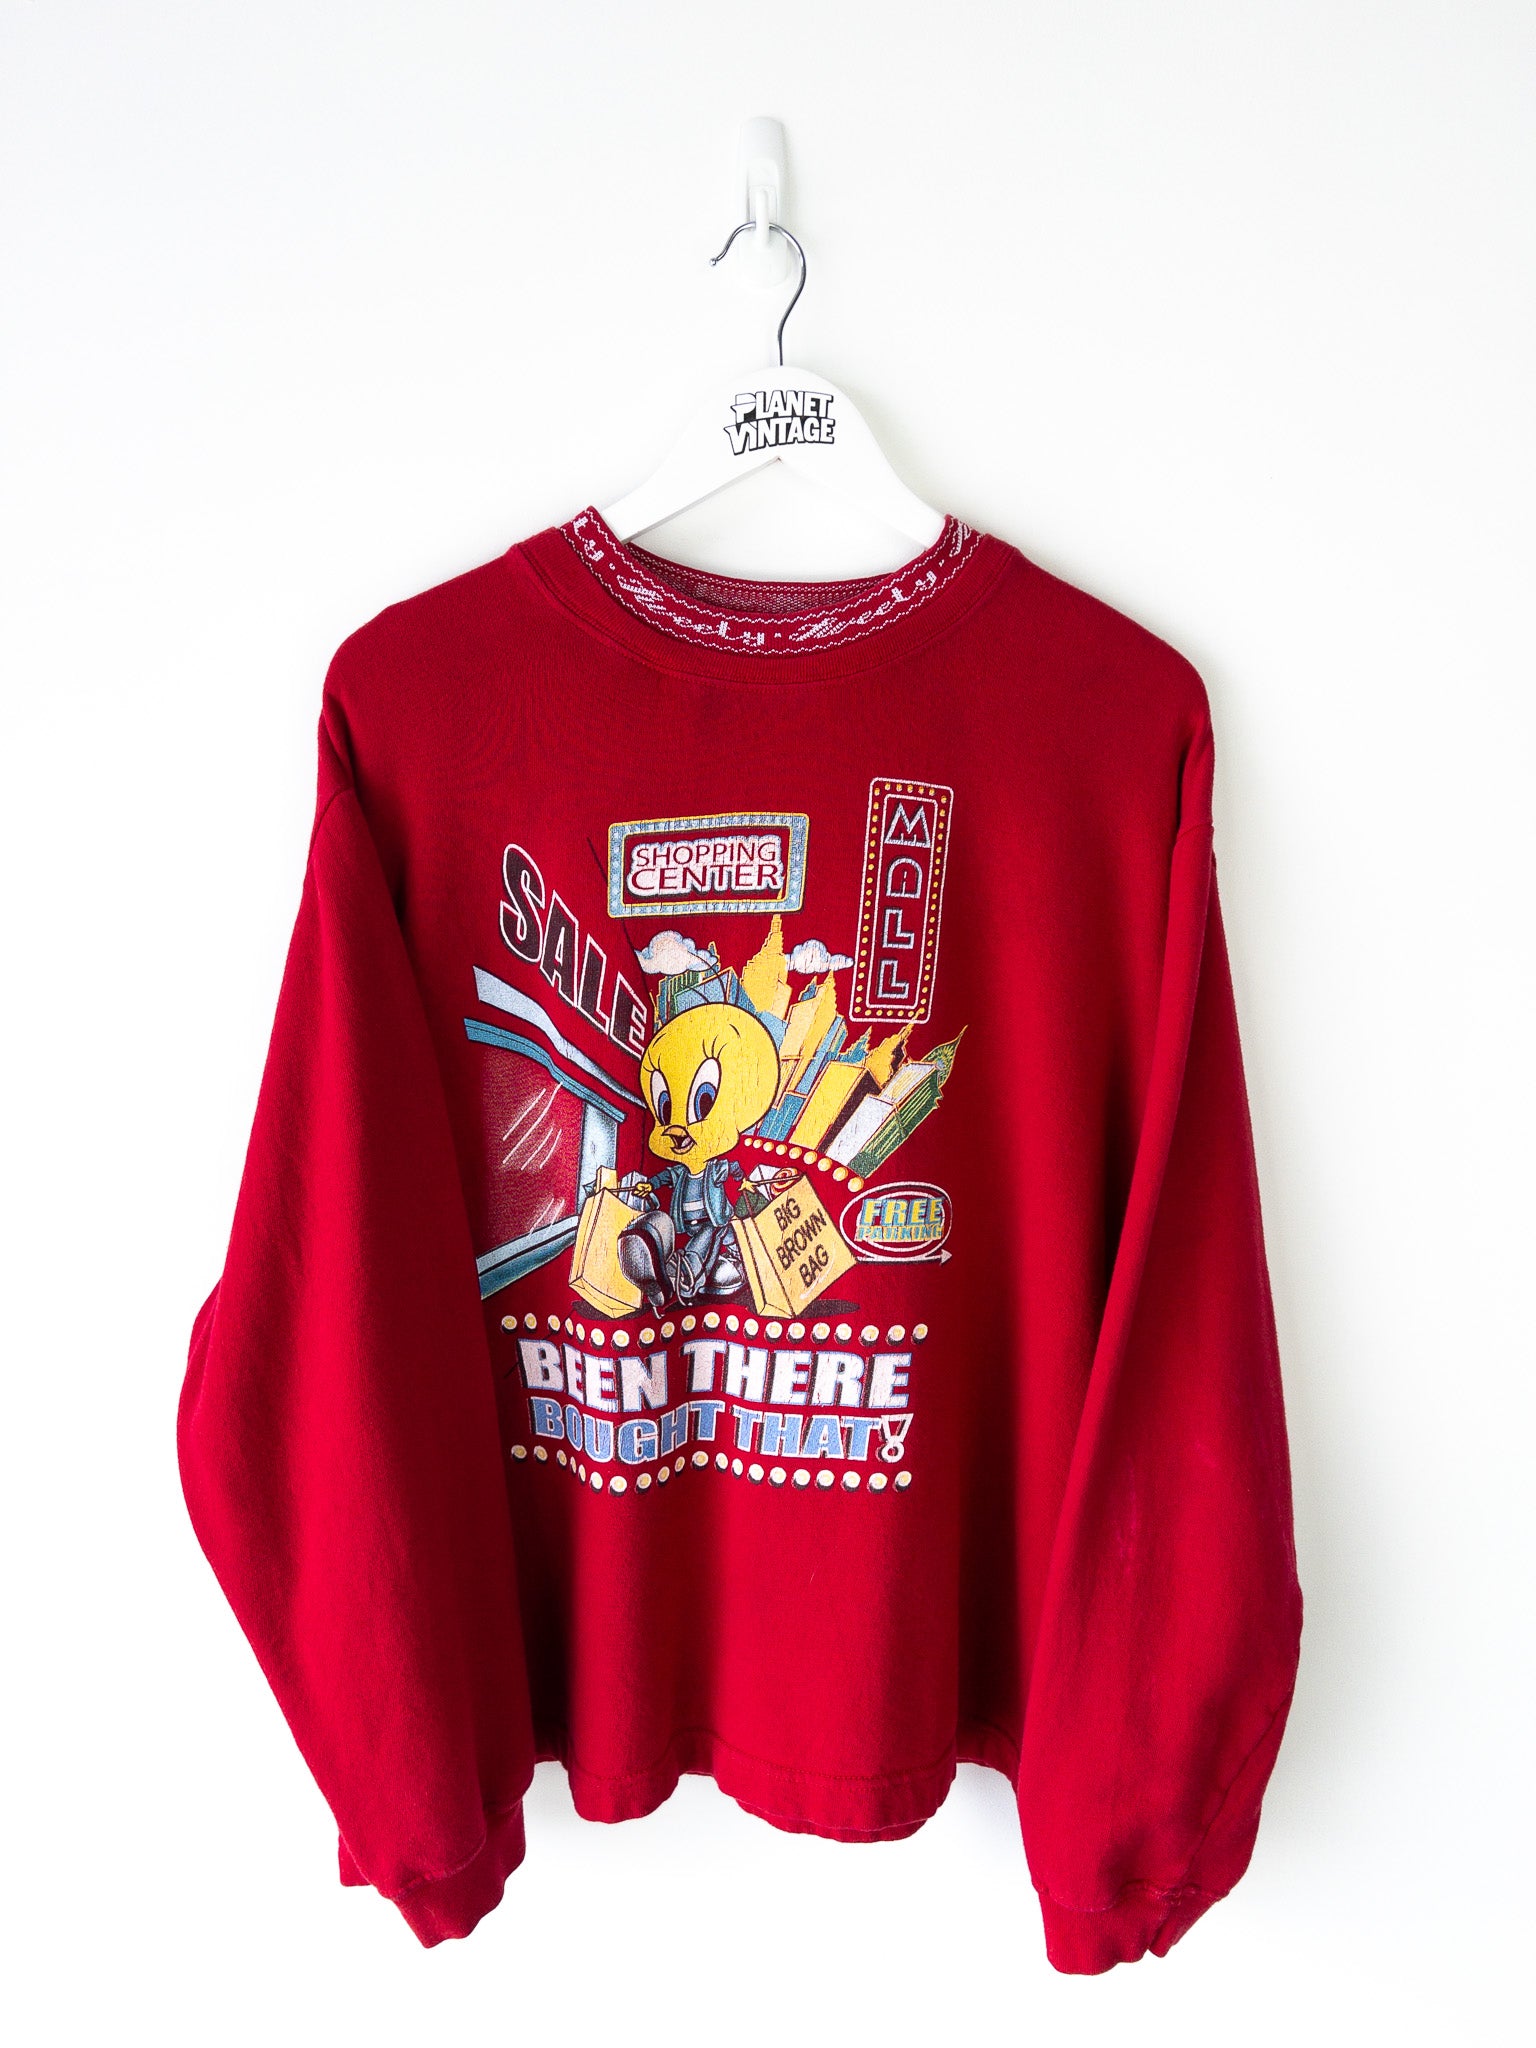 Vintage Tweety 'Been There Bought That!' Sweatshirt (L)